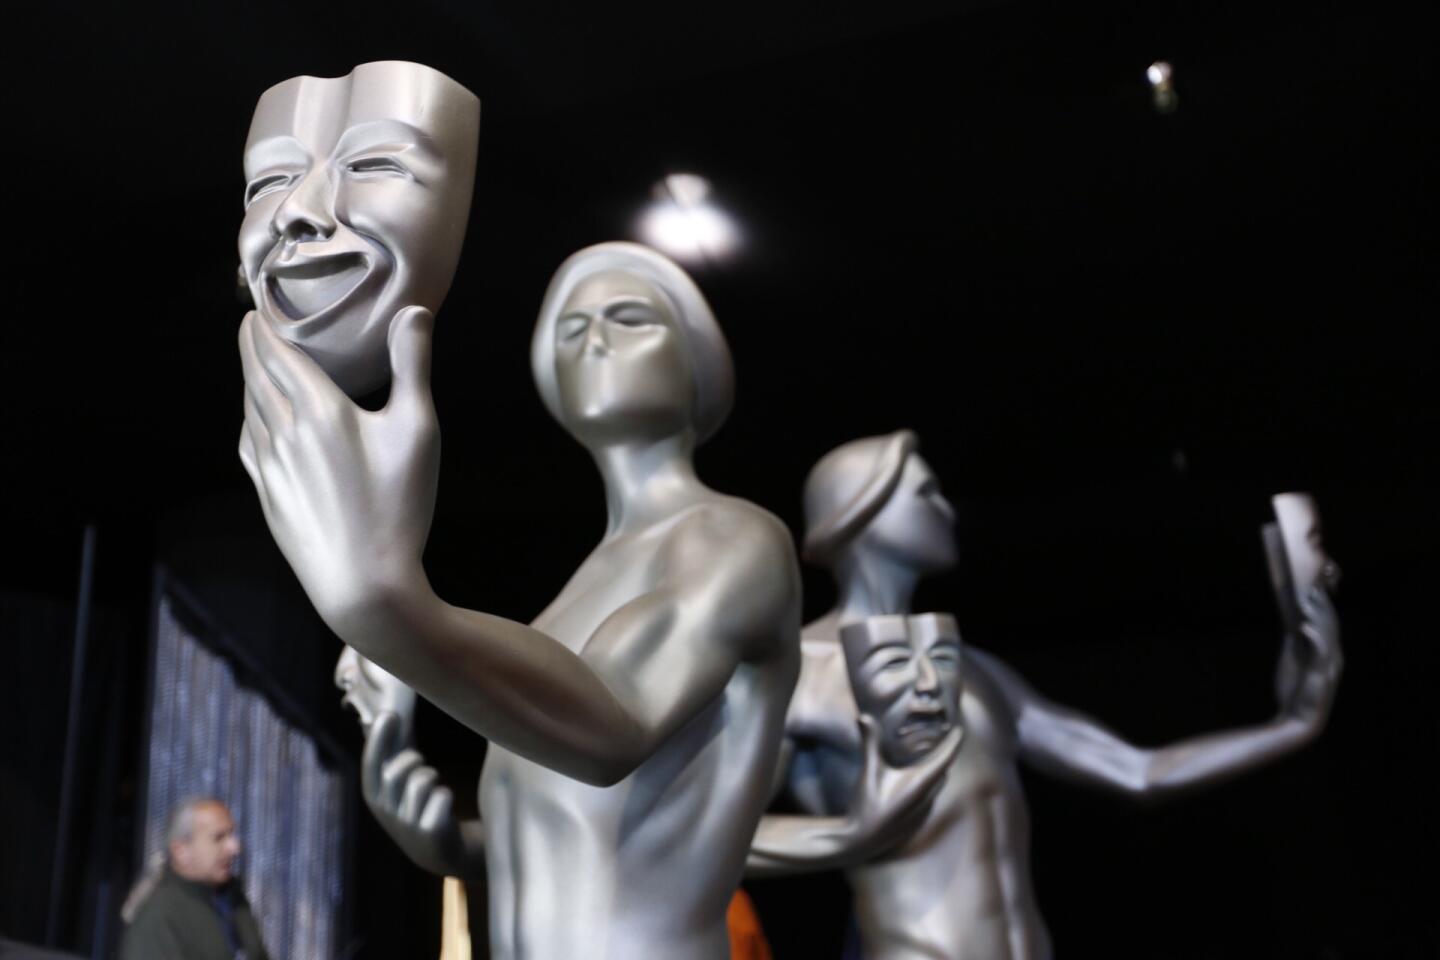 Large versions of the Screen Actors Guild Awards statues await placement on stage Friday morning as preparations continue for the 23rd Screen Actors Guild Awards show Sunday.